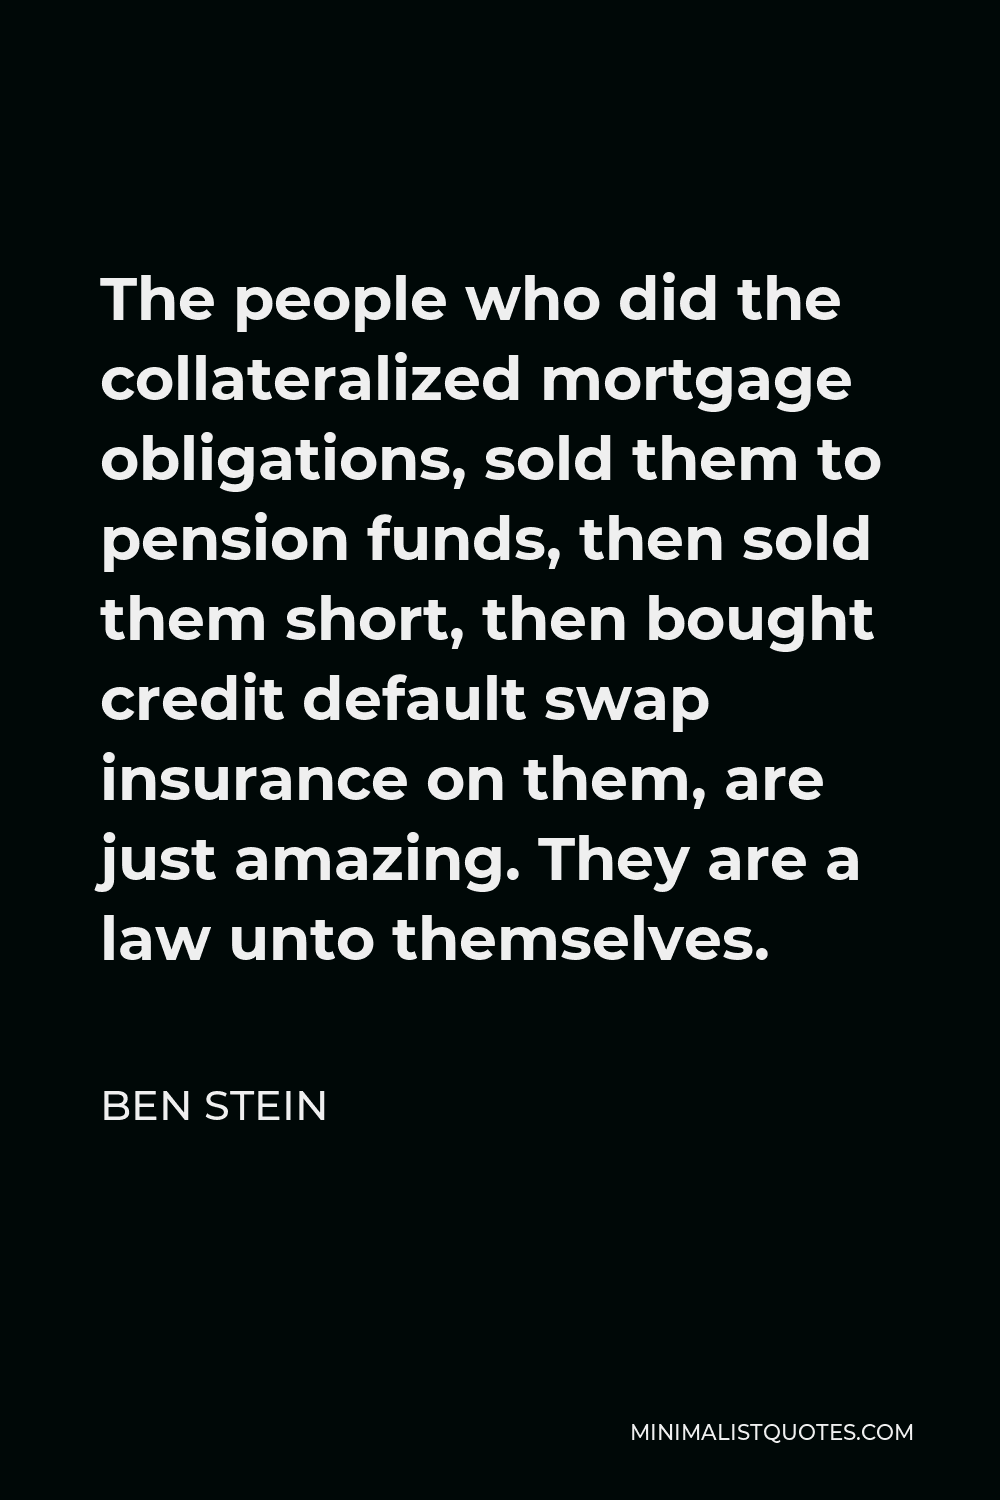 Ben Stein Quote - The people who did the collateralized mortgage obligations, sold them to pension funds, then sold them short, then bought credit default swap insurance on them, are just amazing. They are a law unto themselves.